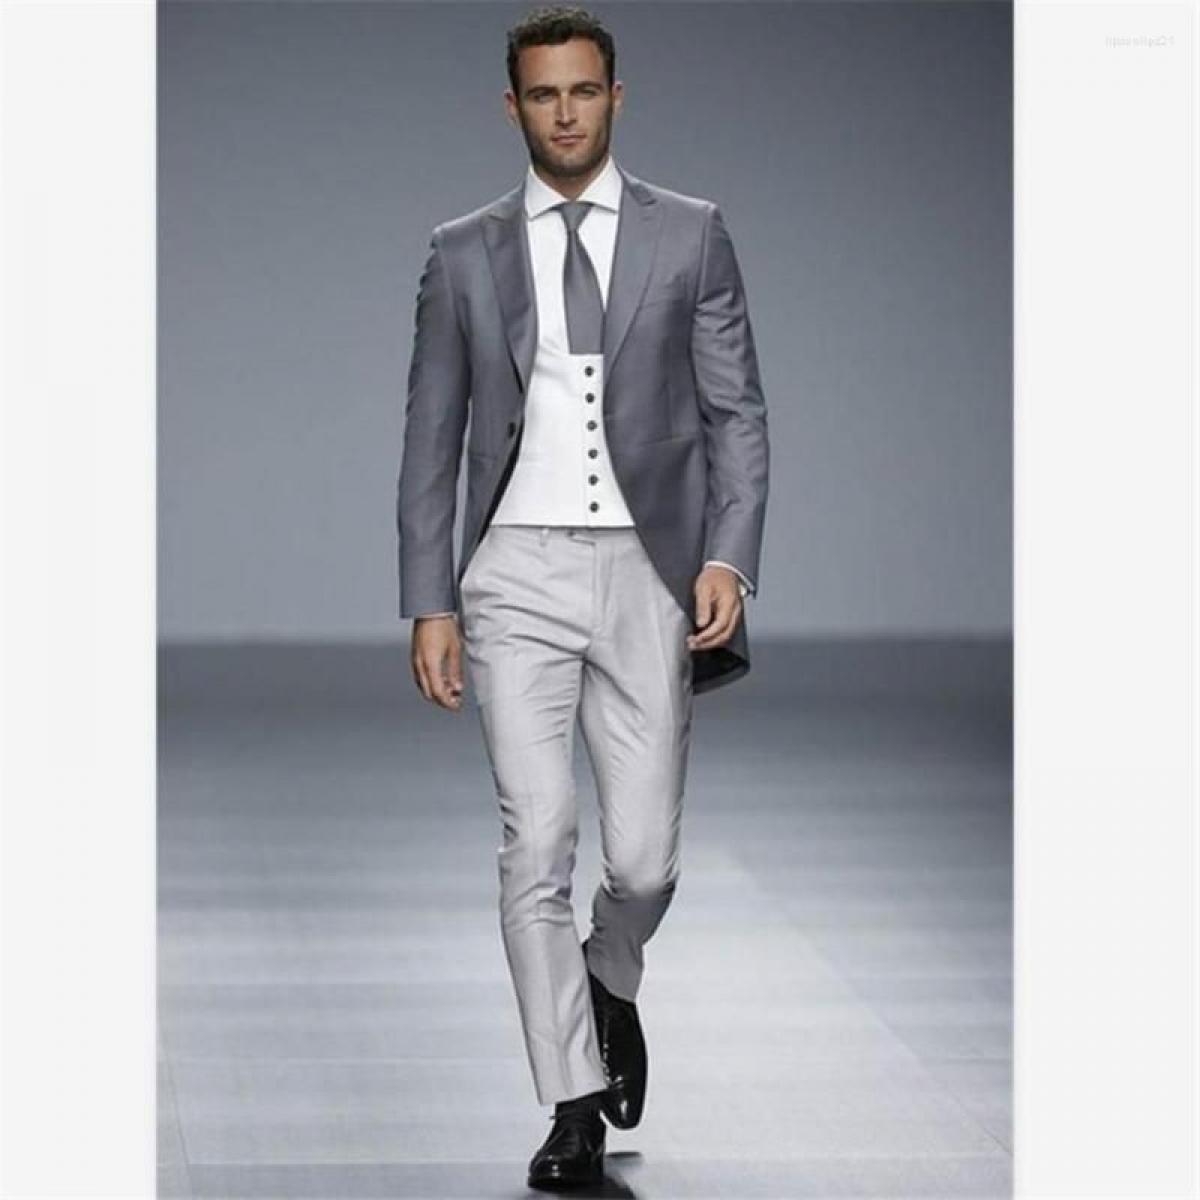 Men's Suits Classic Smolking Terno Slim Fit Easculino Evening For Men Gray Tailcoat Groom Blazer Wedding Prom 3pcs